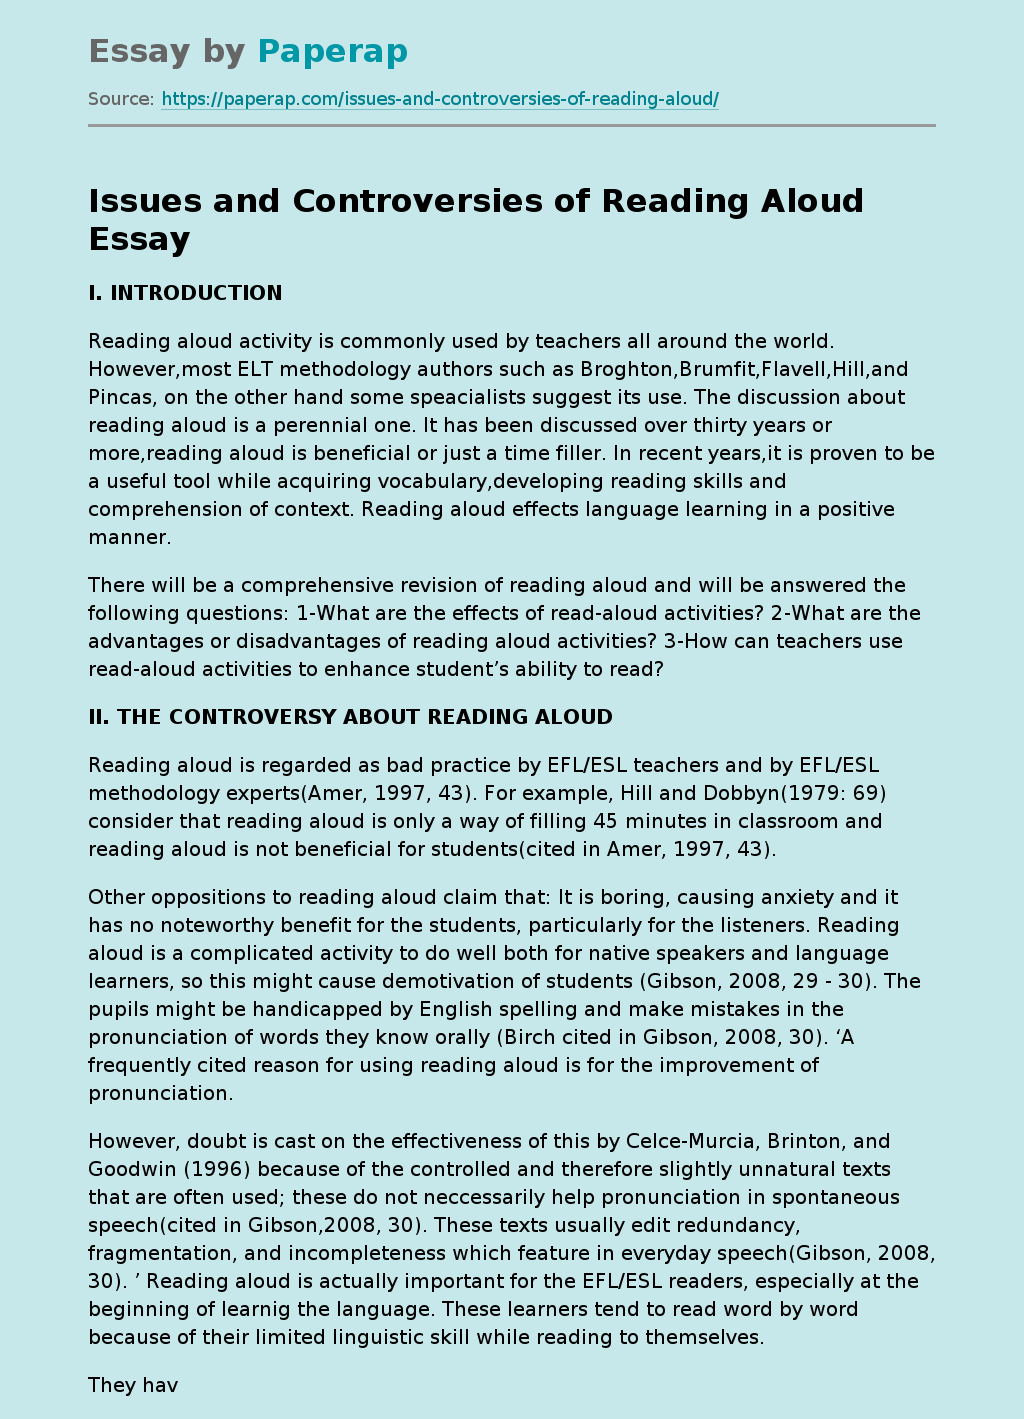 Issues and Controversies of Reading Aloud